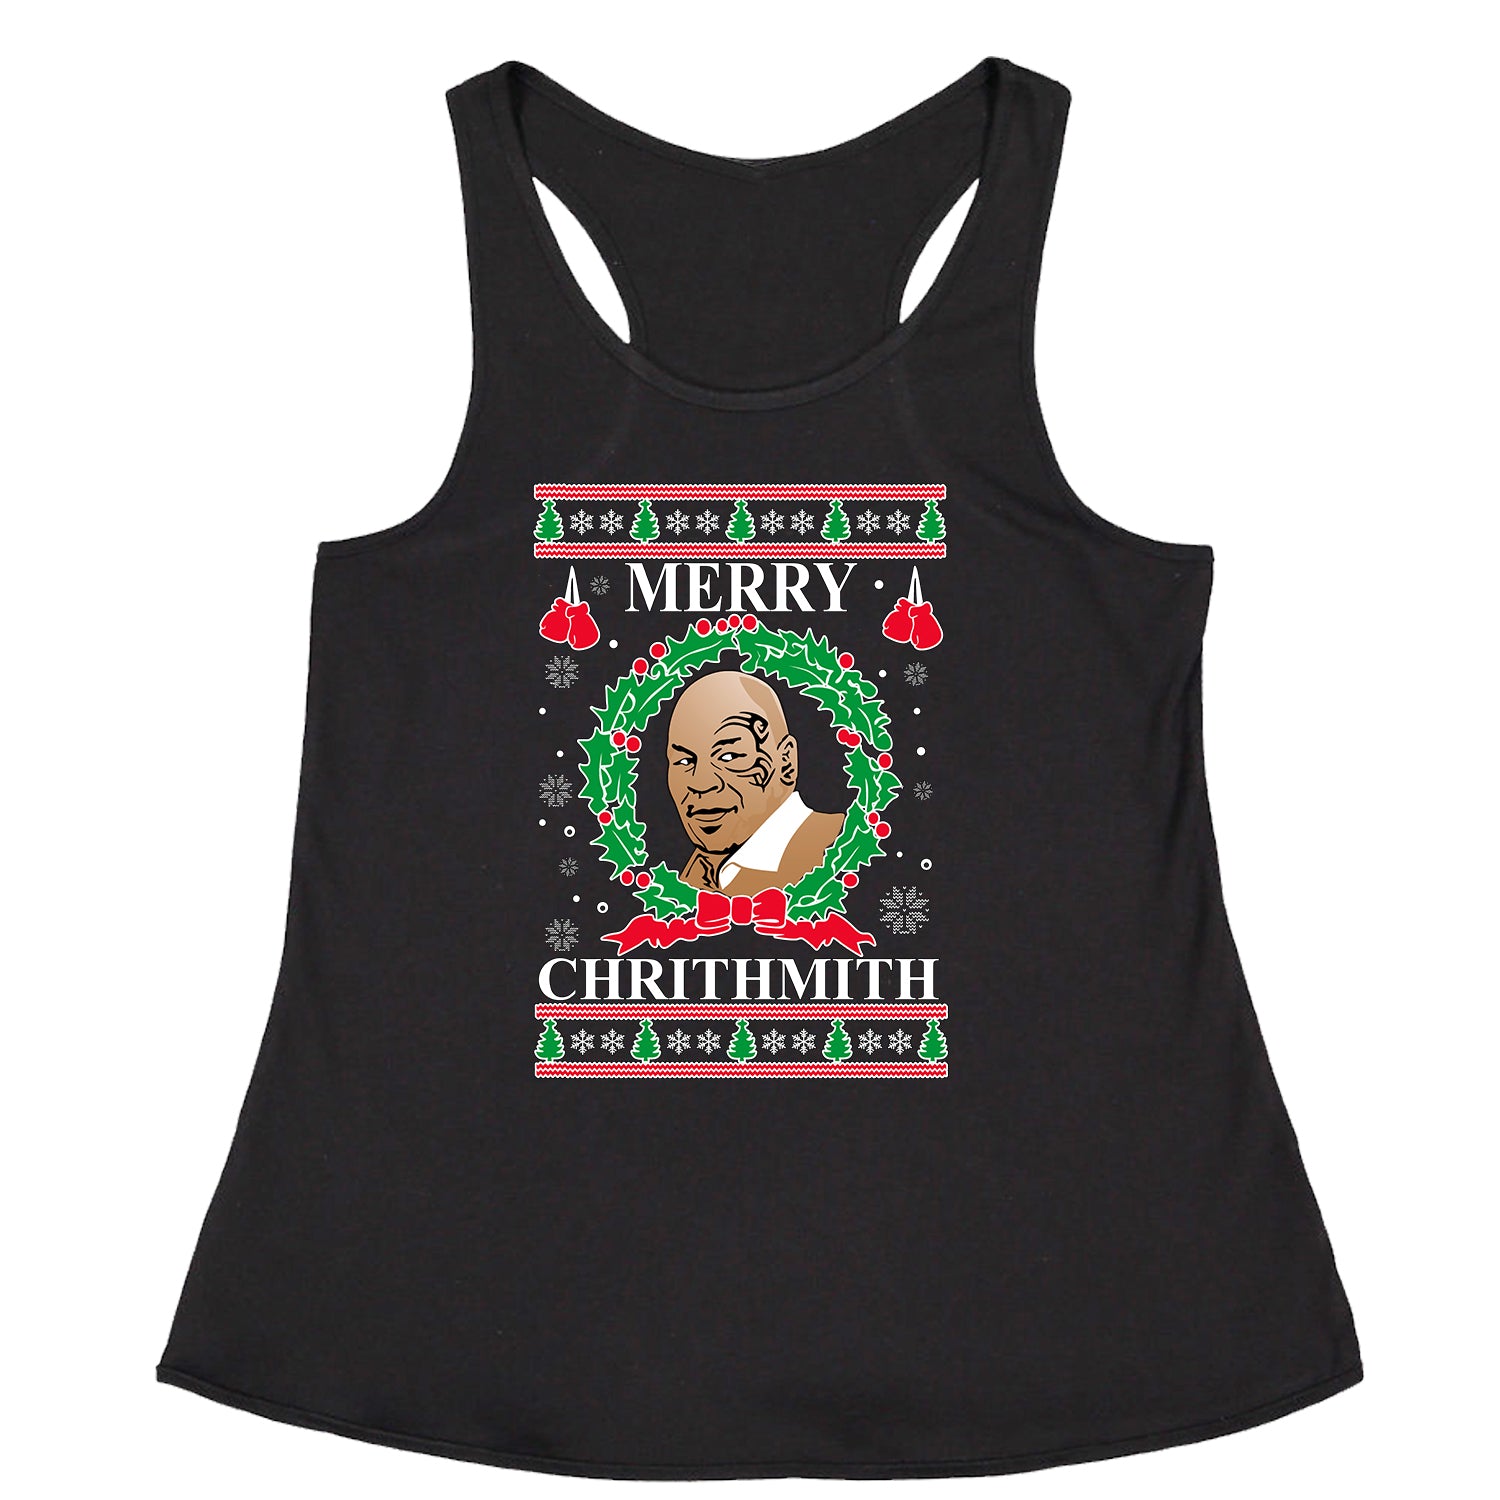 Merry Chrithmith Ugly Christmas Racerback Tank Top for Women christmas, holiday, michael, mike, sweater, tyson, ugly by Expression Tees